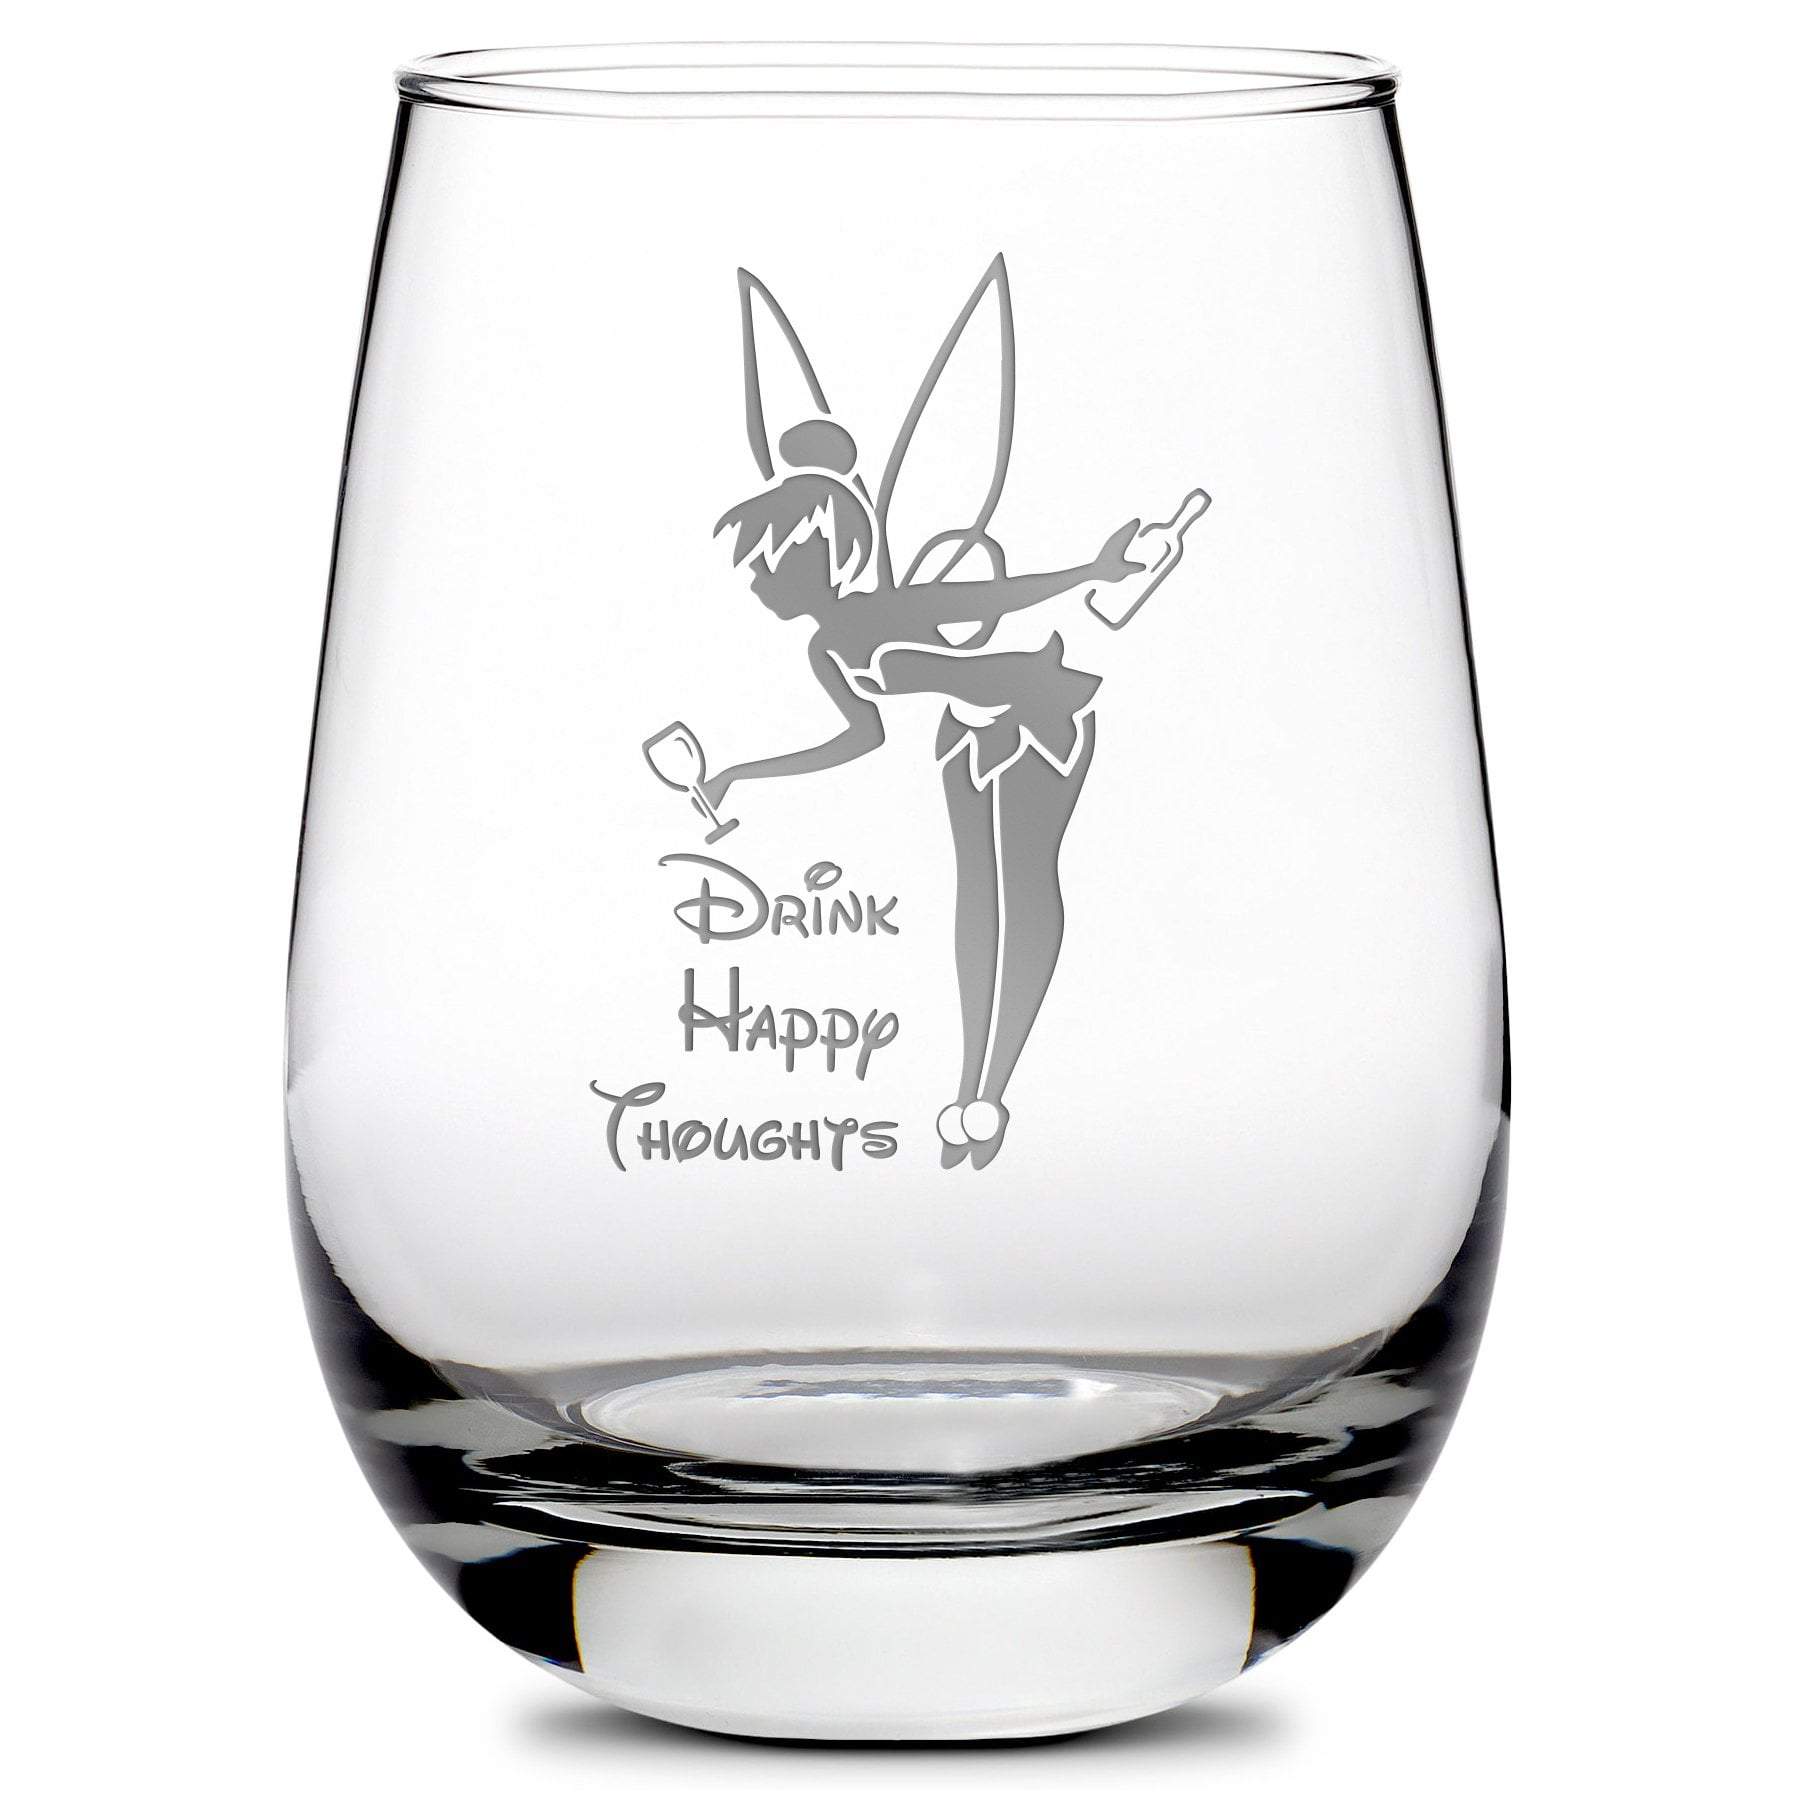 Premium Stemless Wine Glass, Happy Thoughts, 16oz by Integrity Bottles